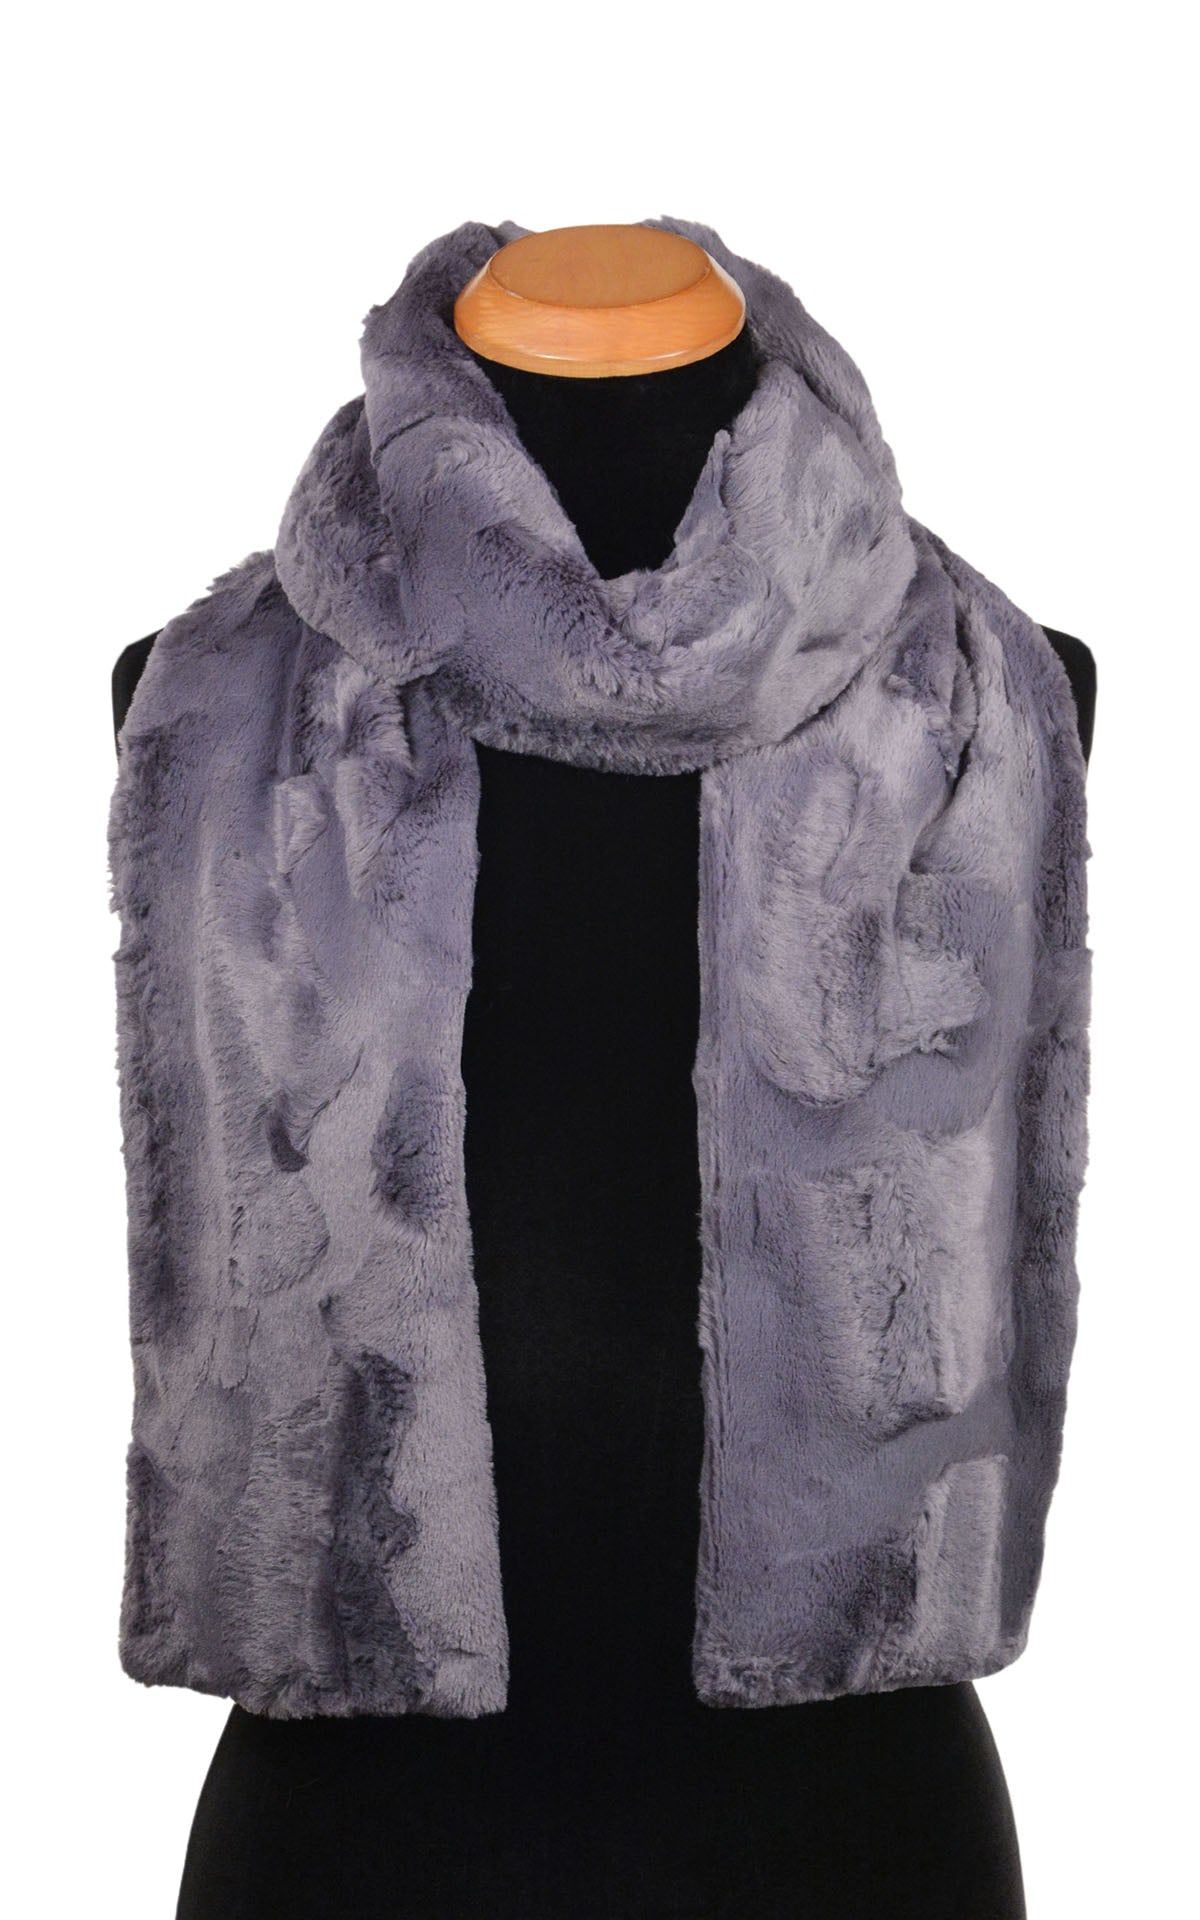 Classic Faux Fur Scarf / Shown in Cuddly Faux Fur in Cool Gray | By Pandemonium Seattle